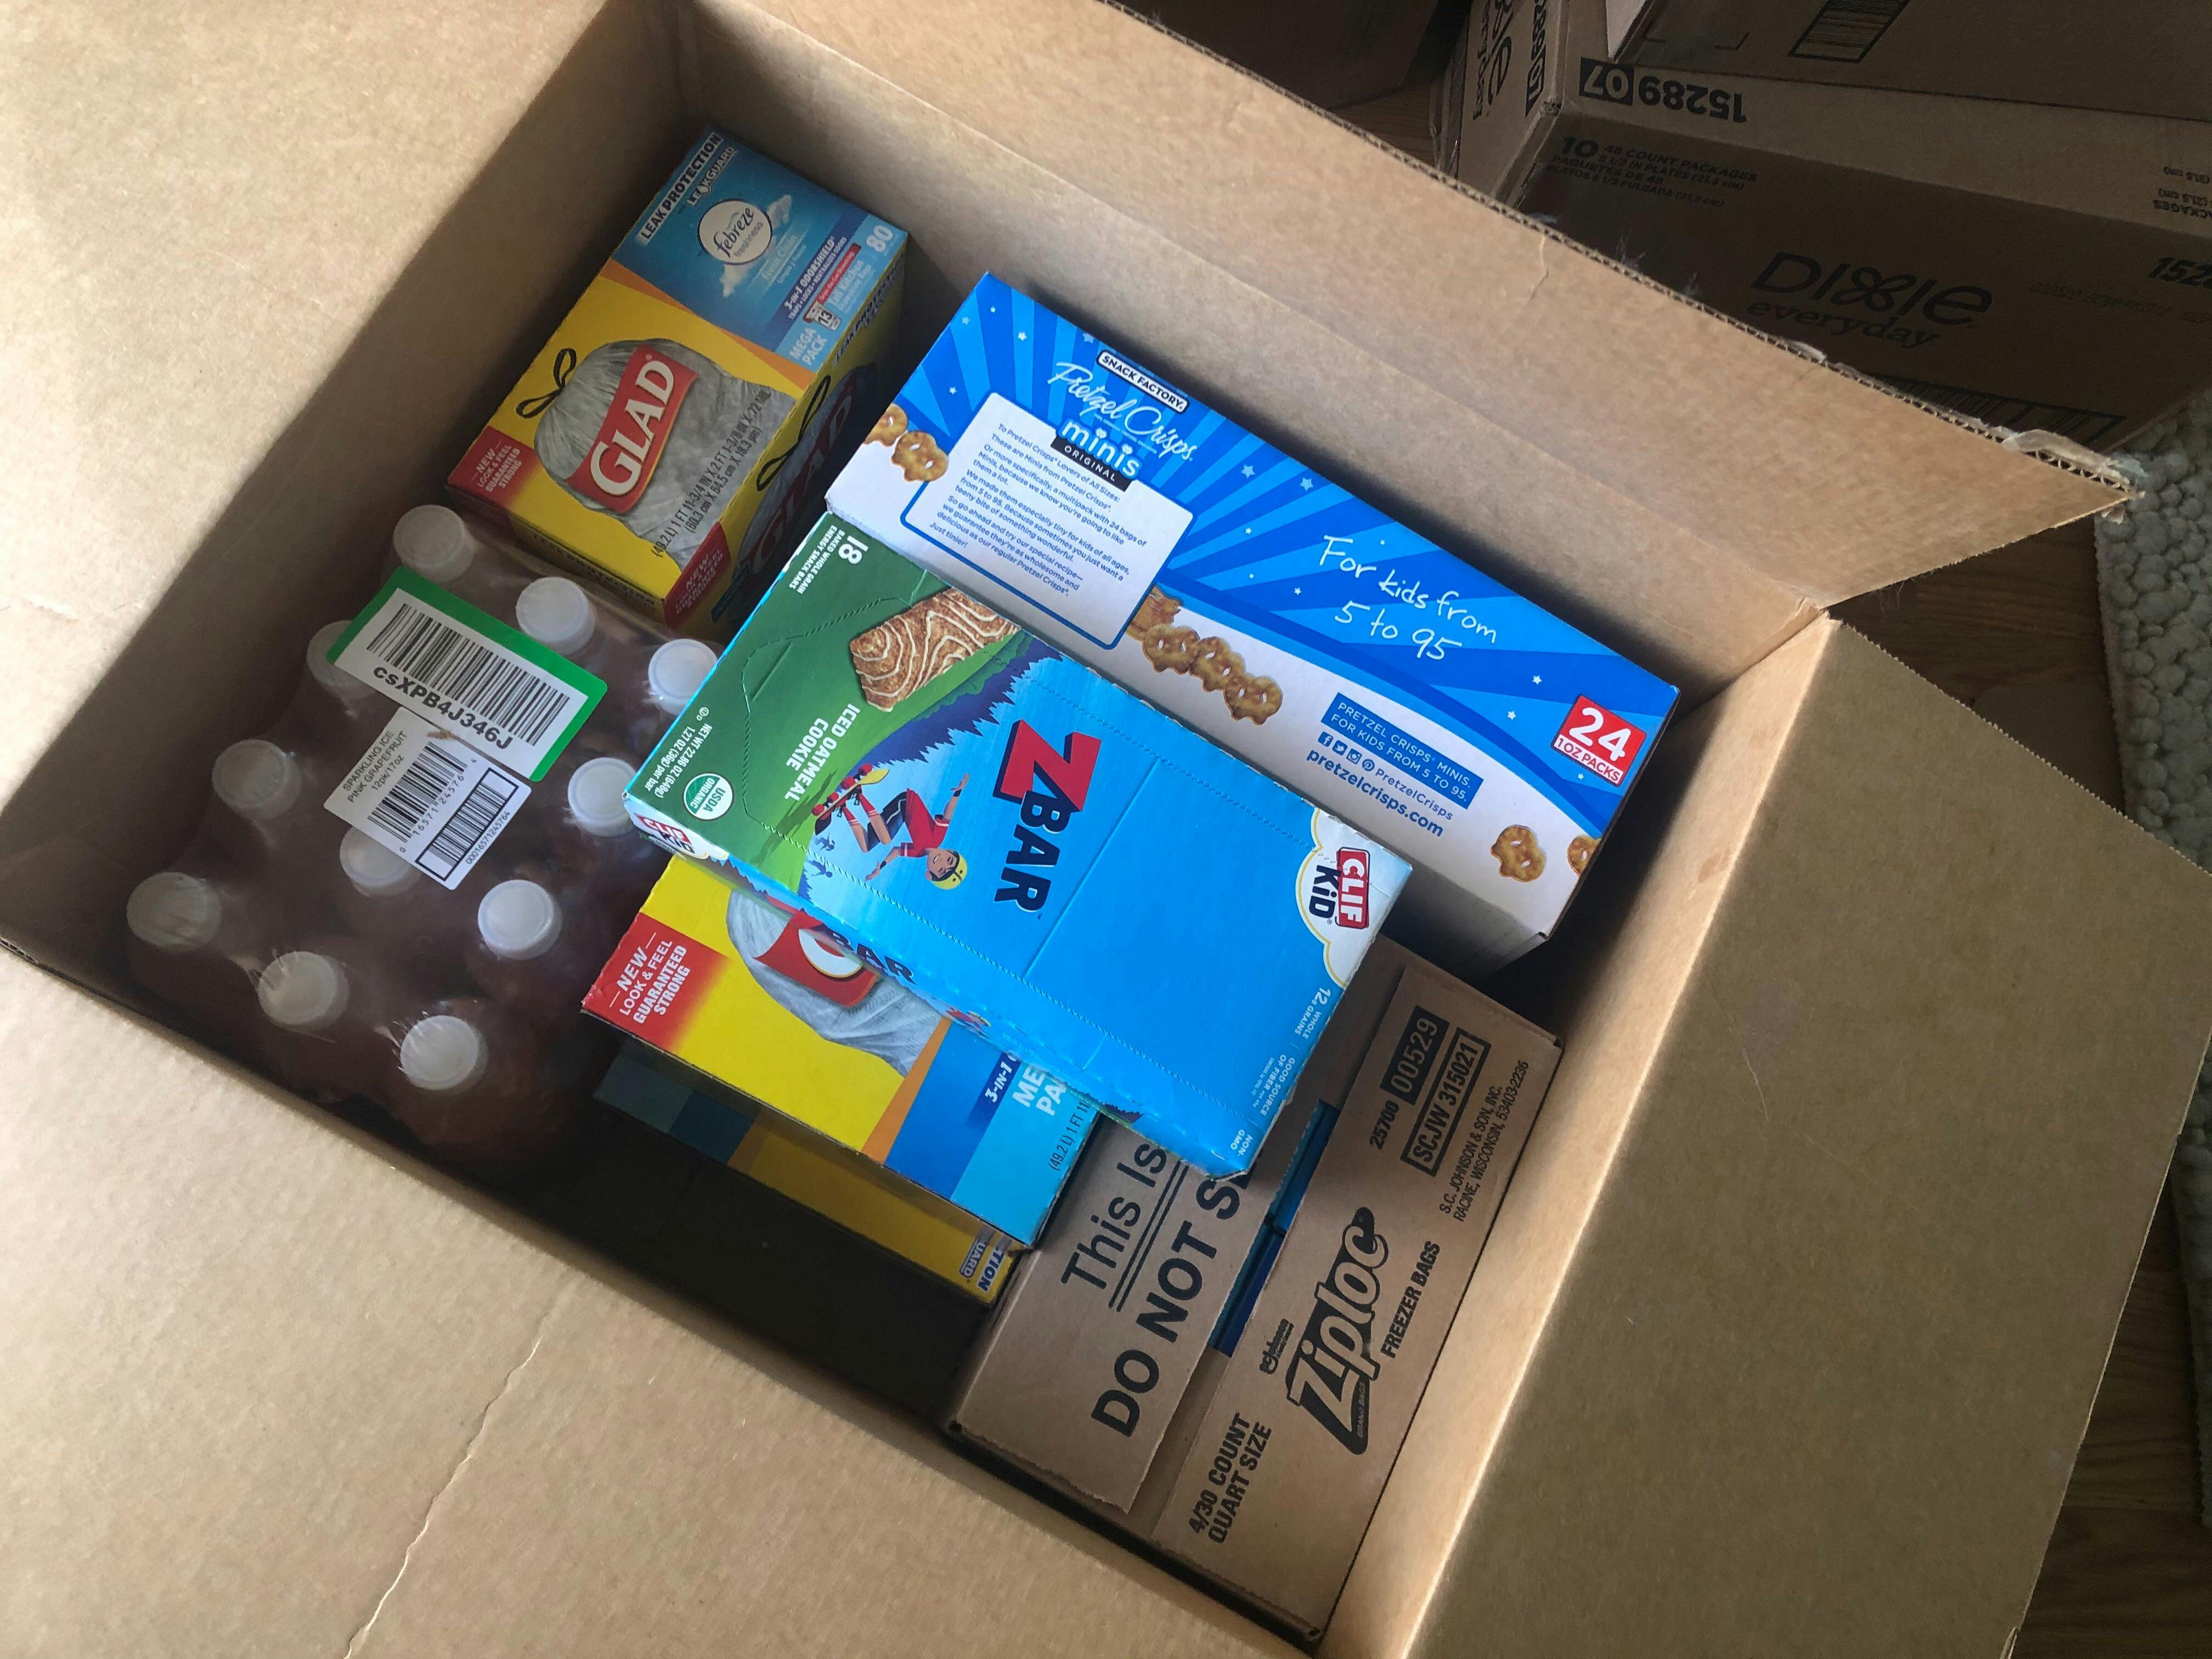 An amazon box filled with home products and snack foods.